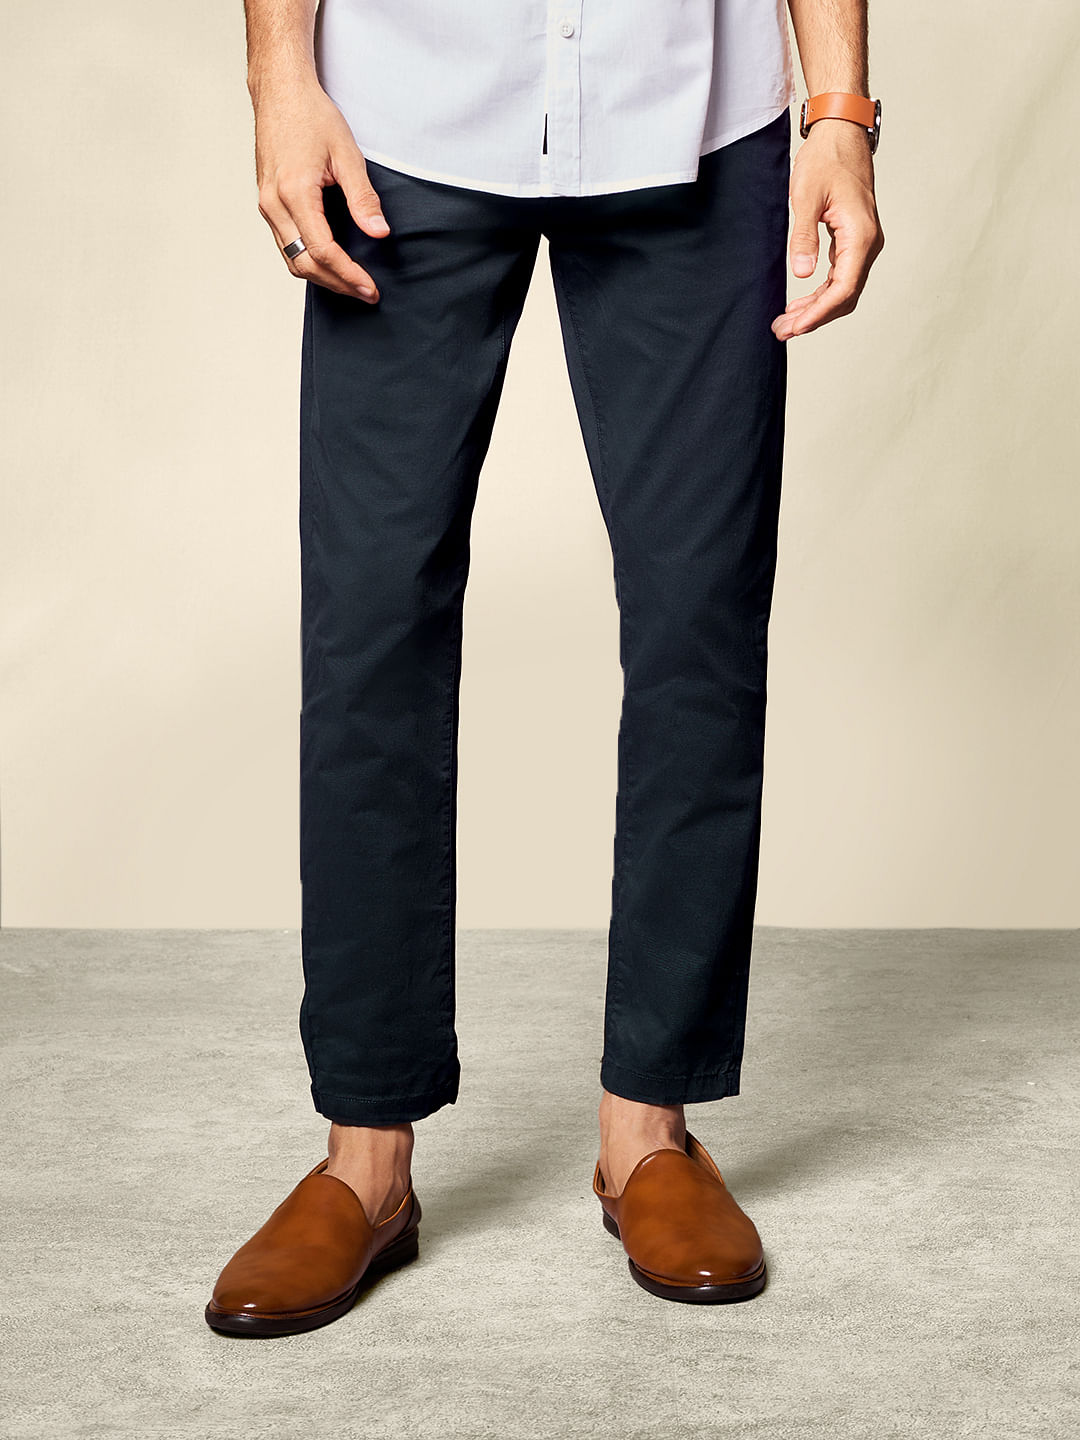 Buy Solids Midnight Blue Men's Chino Pant Online